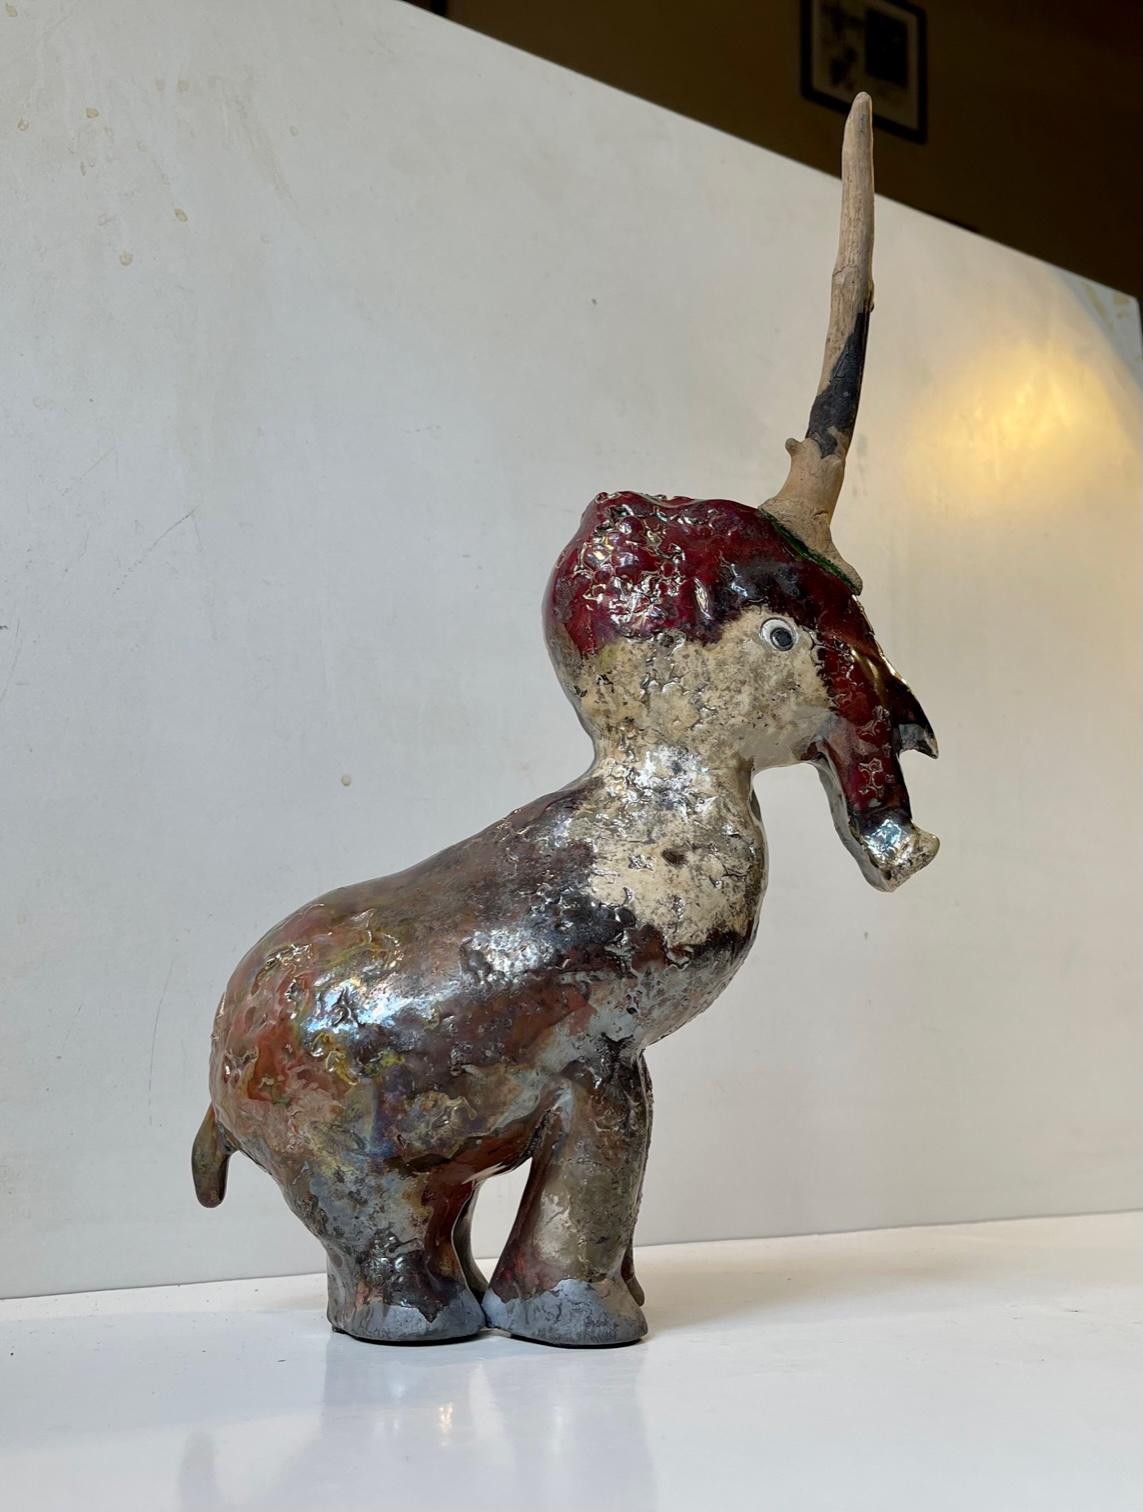 Unique artist/ceramist signed unicorn in Baku burnt stoneware. A waste variety of different glaze colors and the 'horn' itself is actually made from wood. Unknown/un-identified Danish ceramist circa 2000 is a style reminiscent of Sten Lykke Madsen.